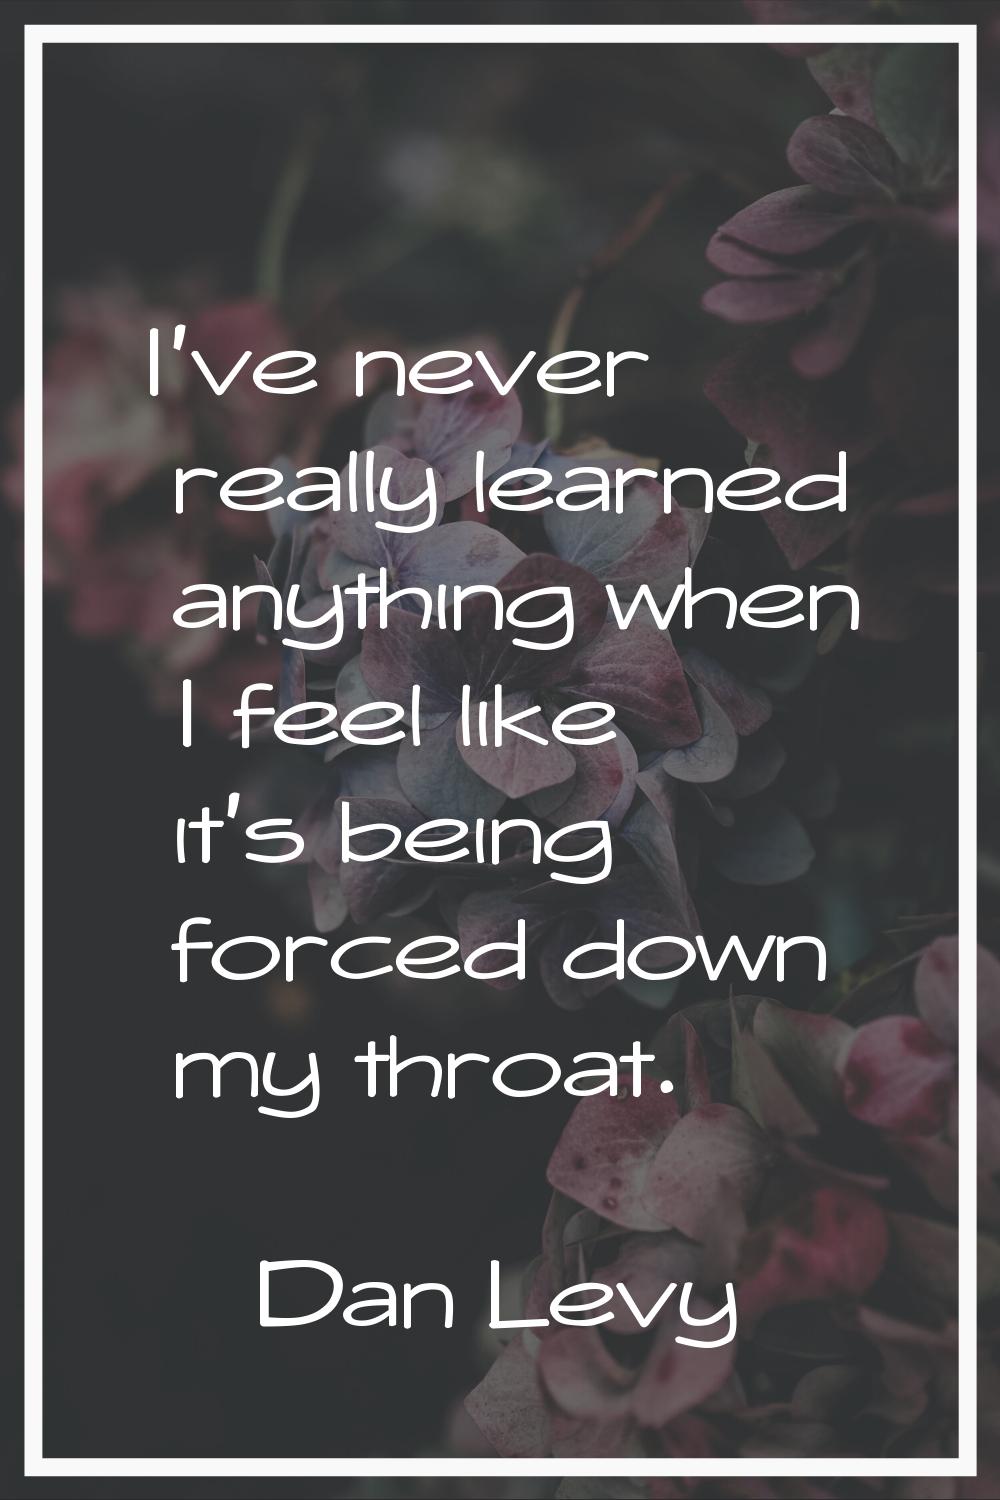 I've never really learned anything when I feel like it's being forced down my throat.